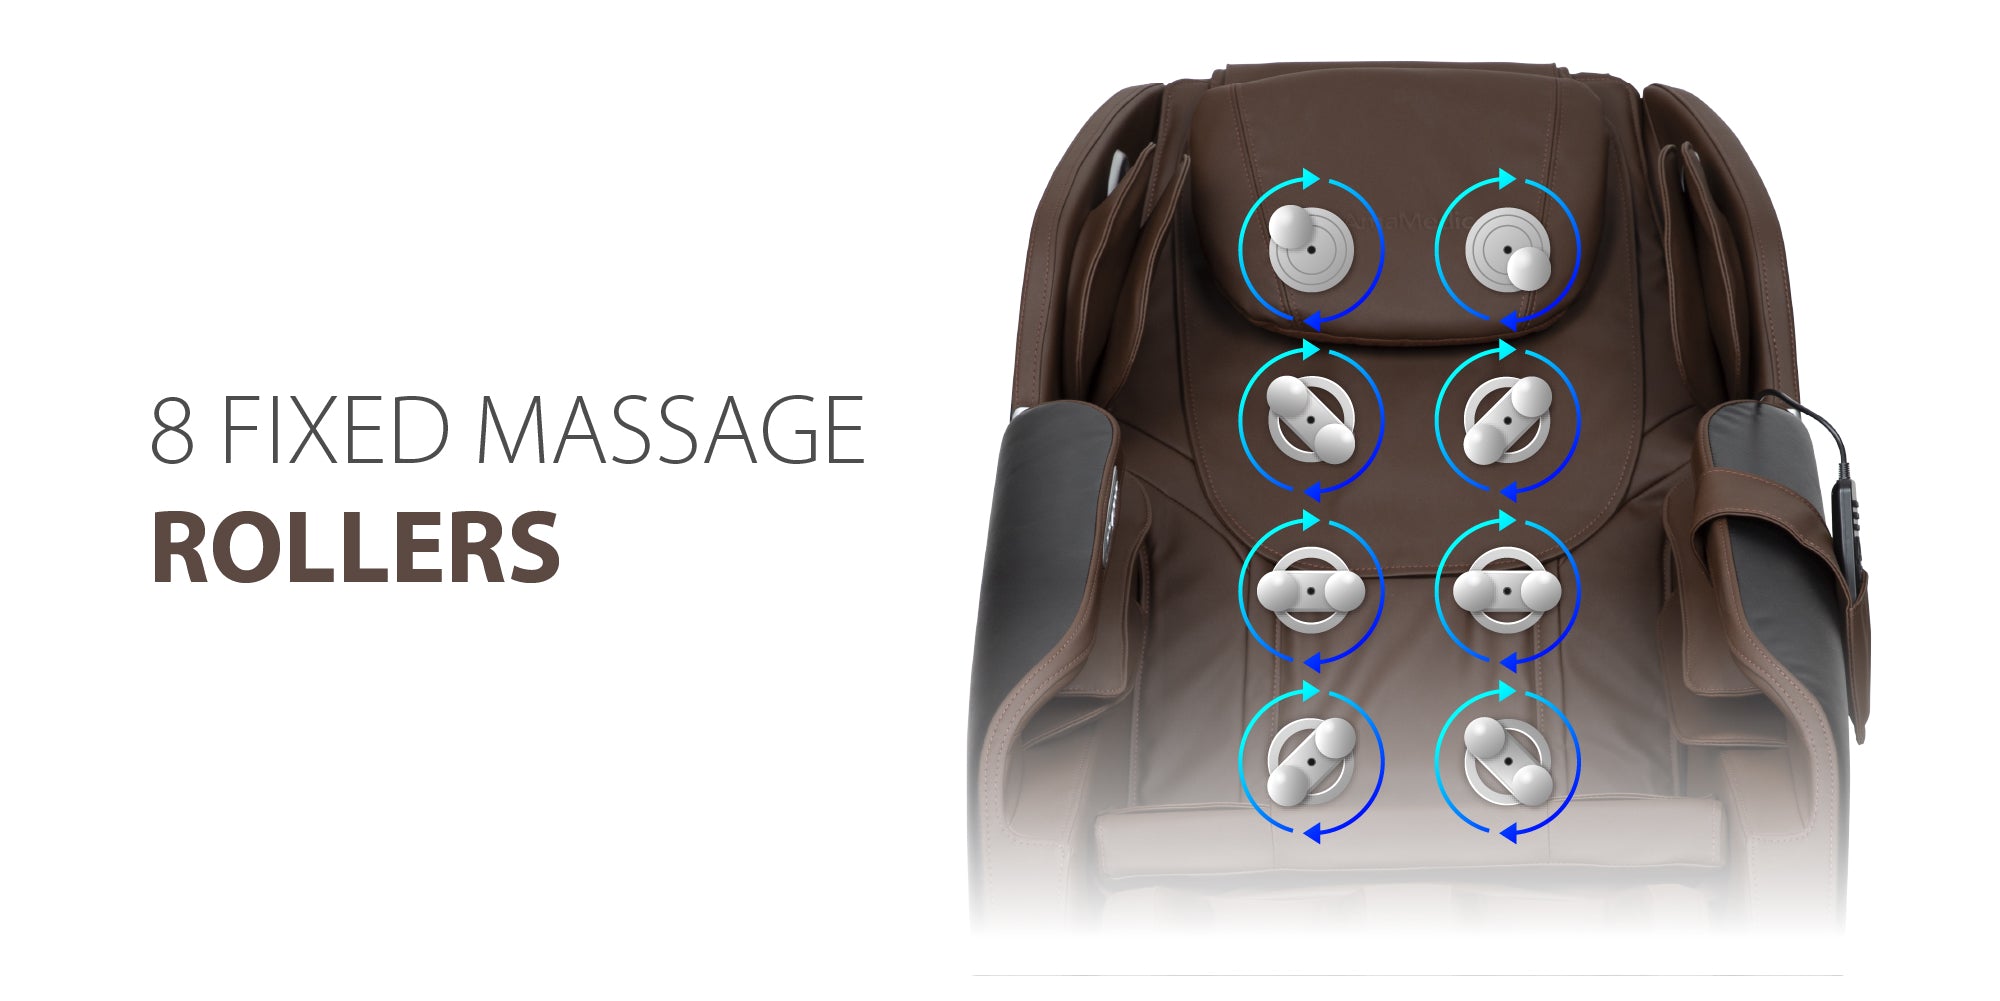 8 Fixed Massage Rollers